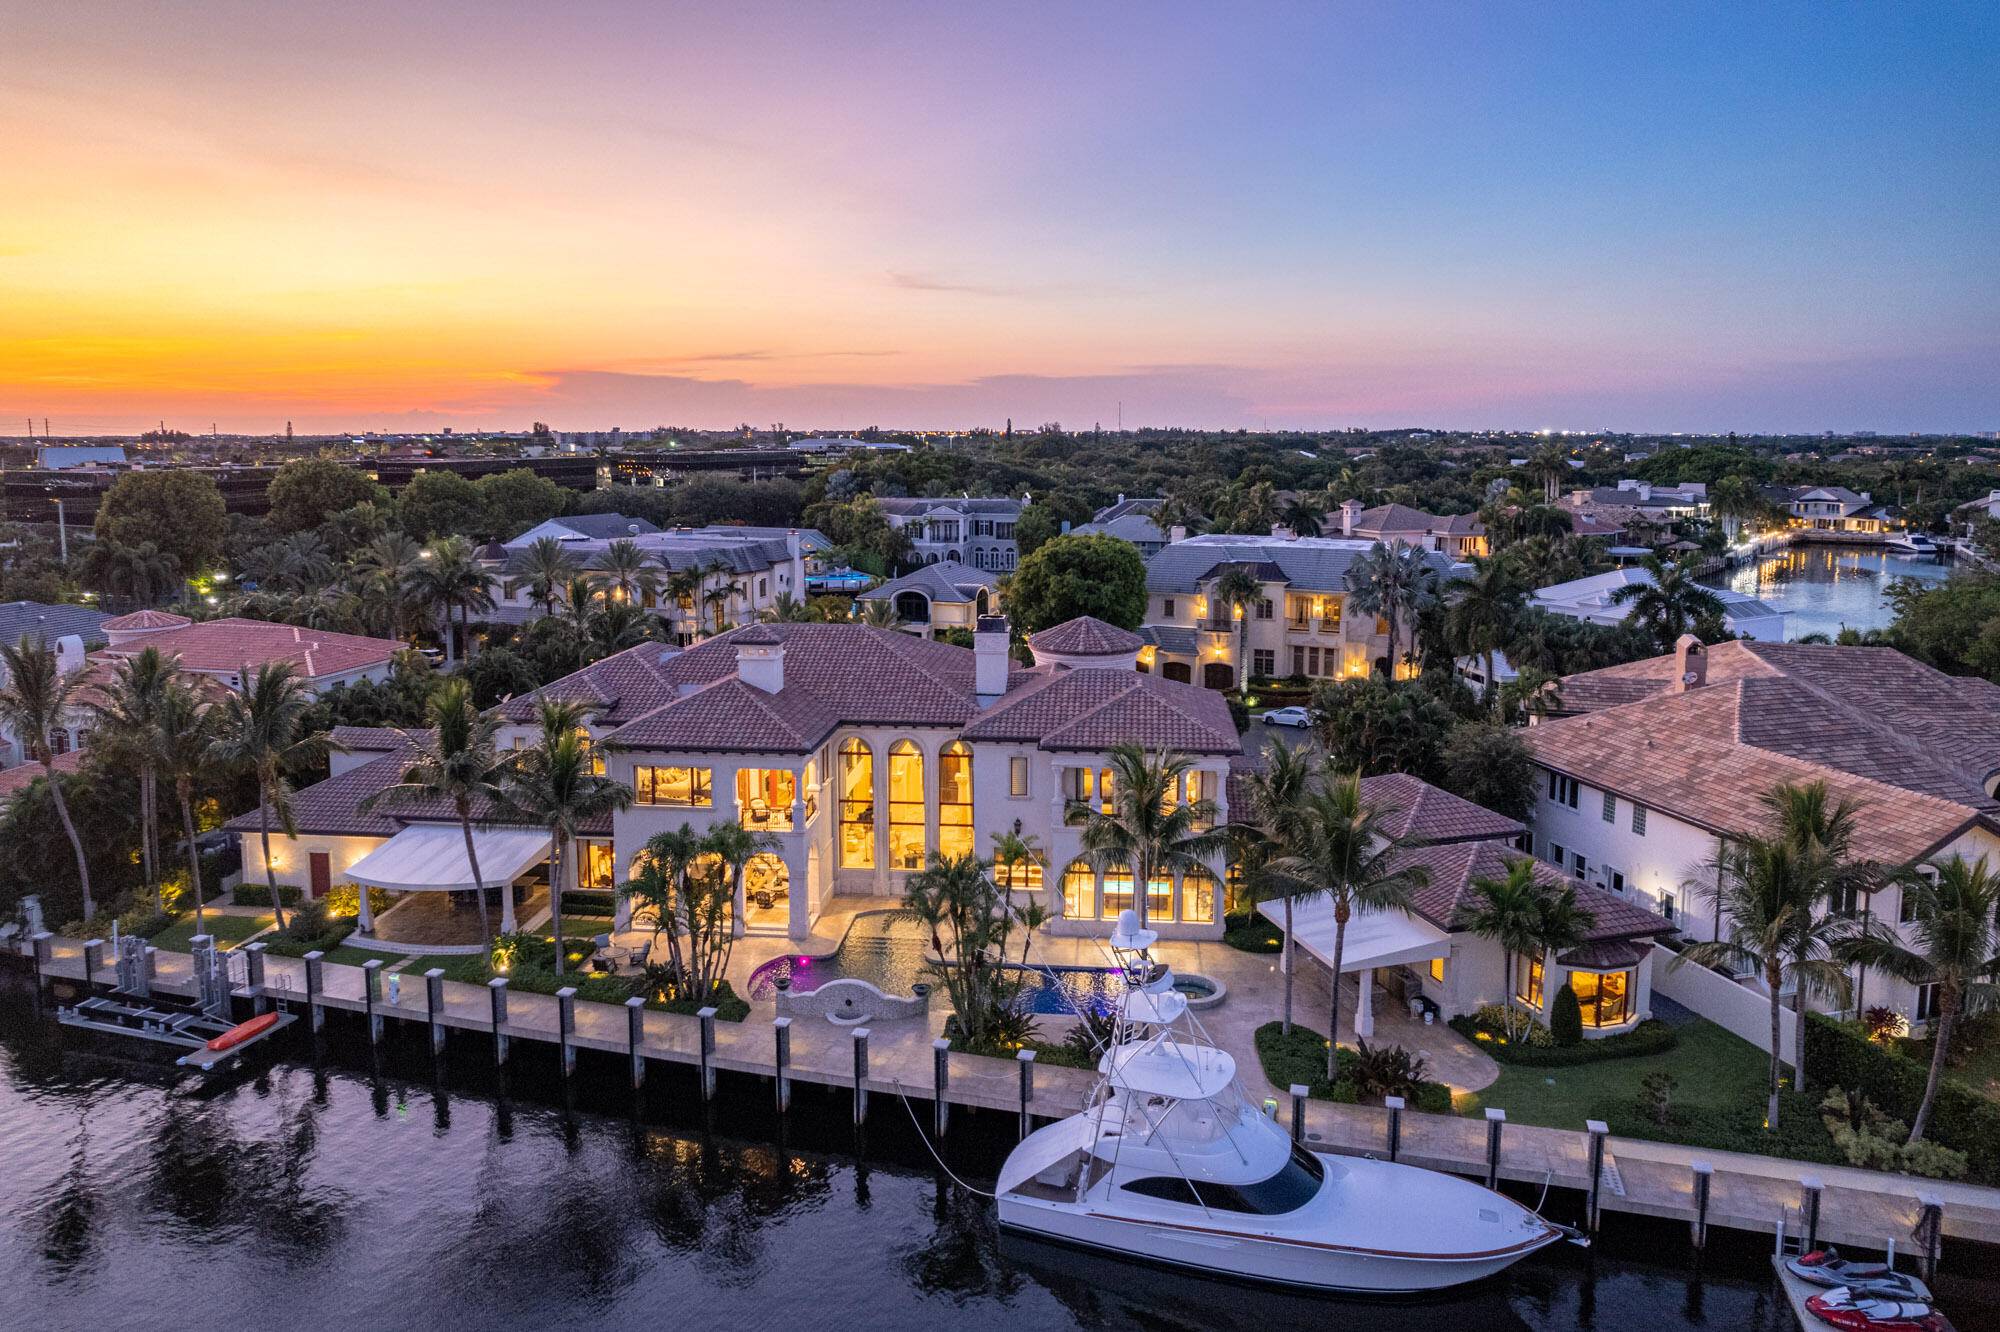 With its show stopping blend of Old World architectural marvels and modern era splendor, the famed Nero Estate stands alone as a true residential original in South Florida.